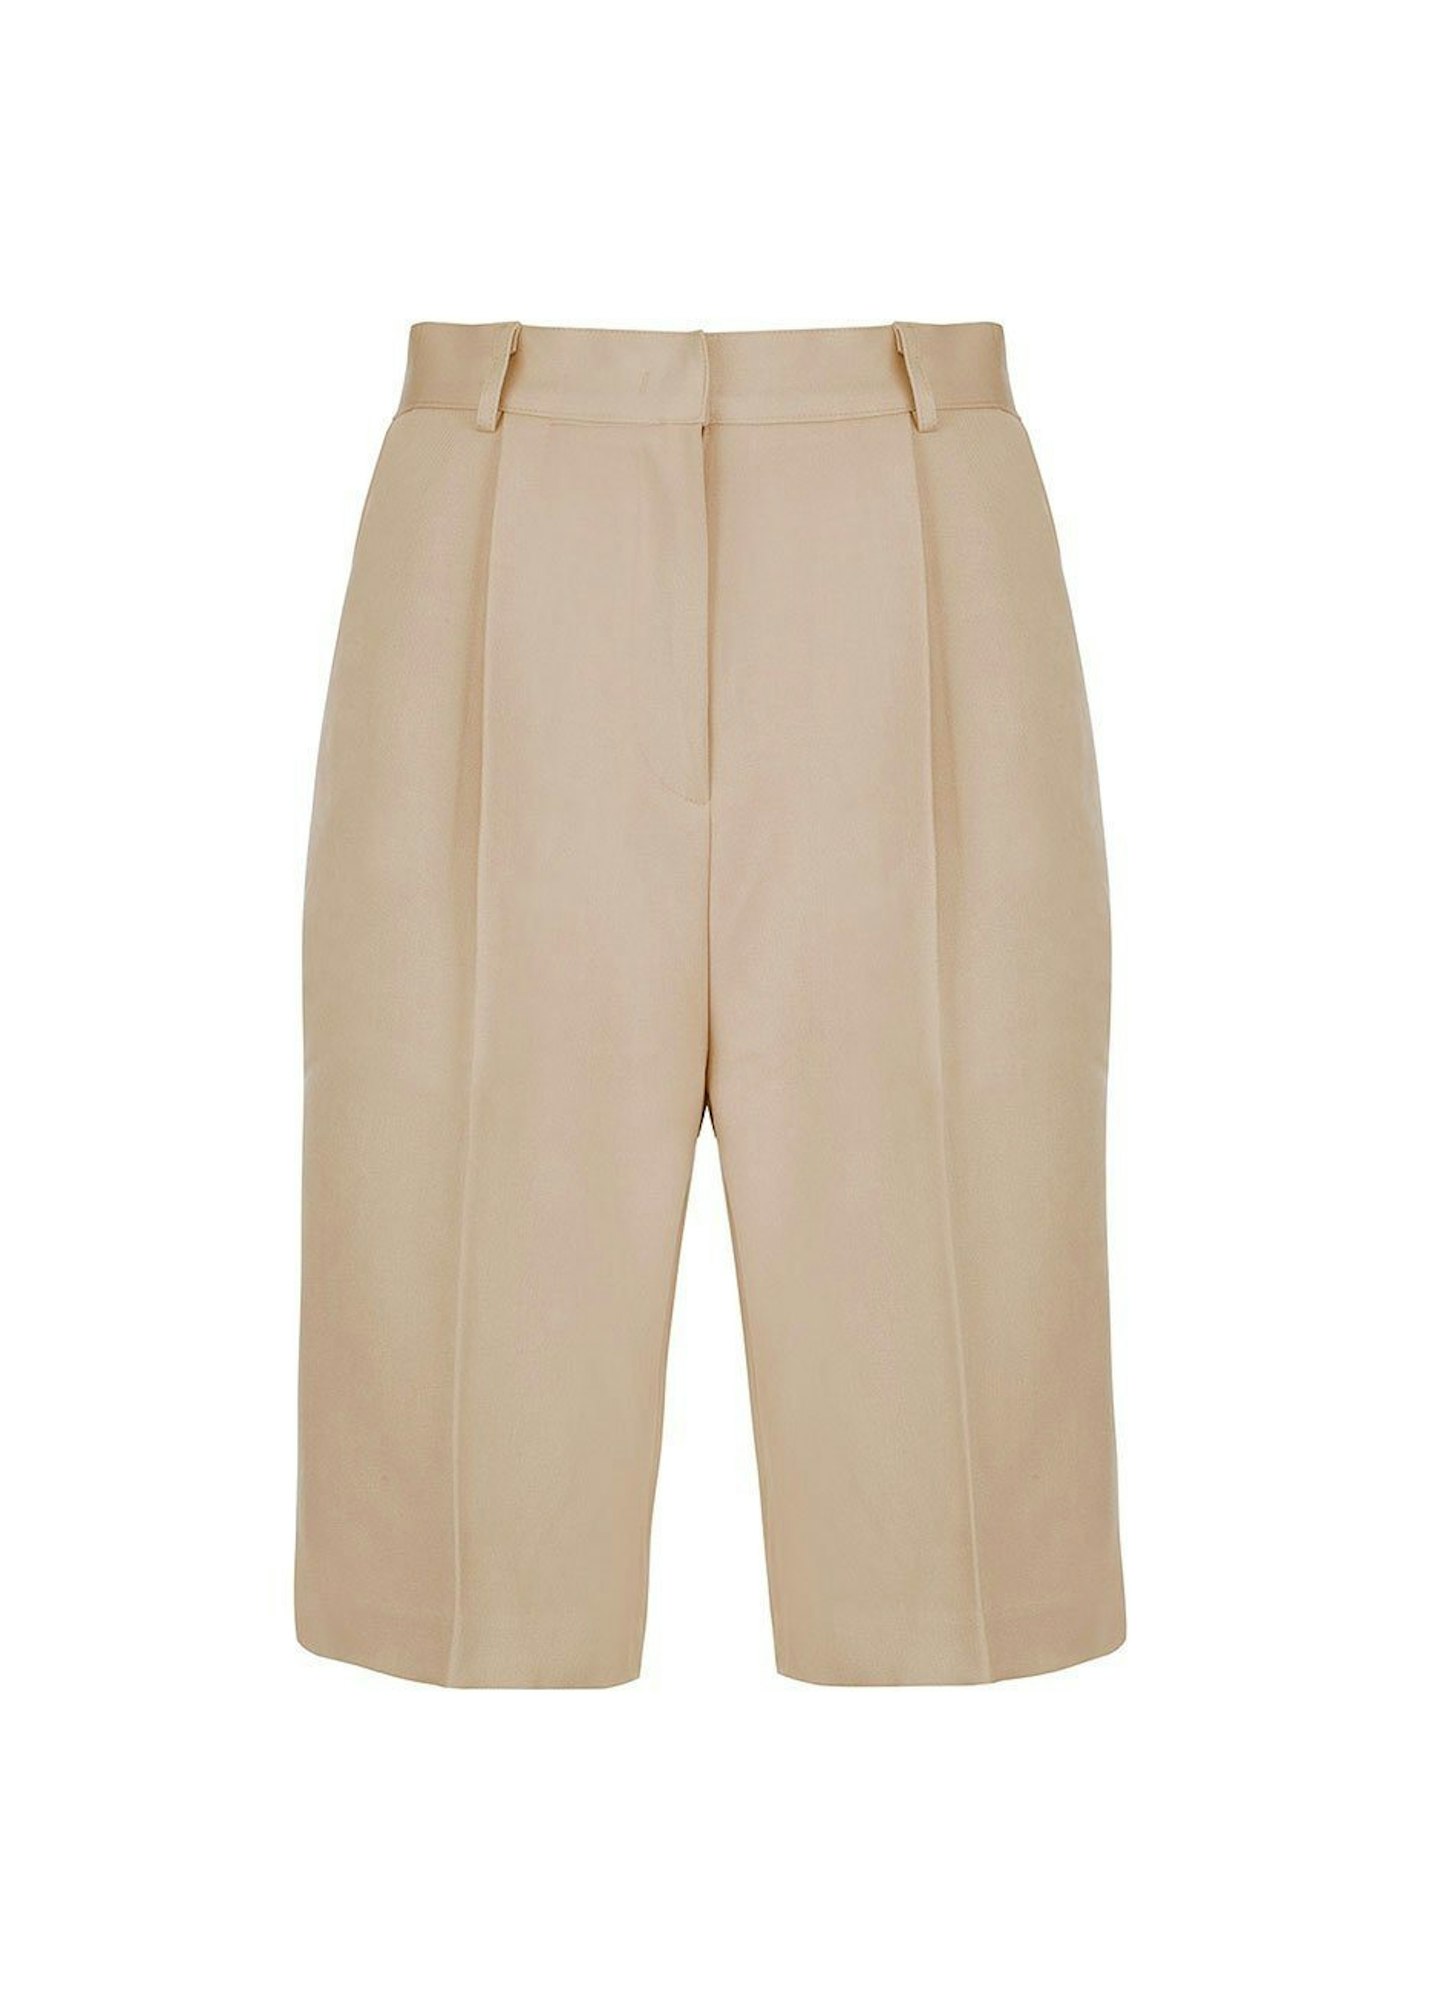 Best Beige Clothes To Buy Now | Fashion | Grazia